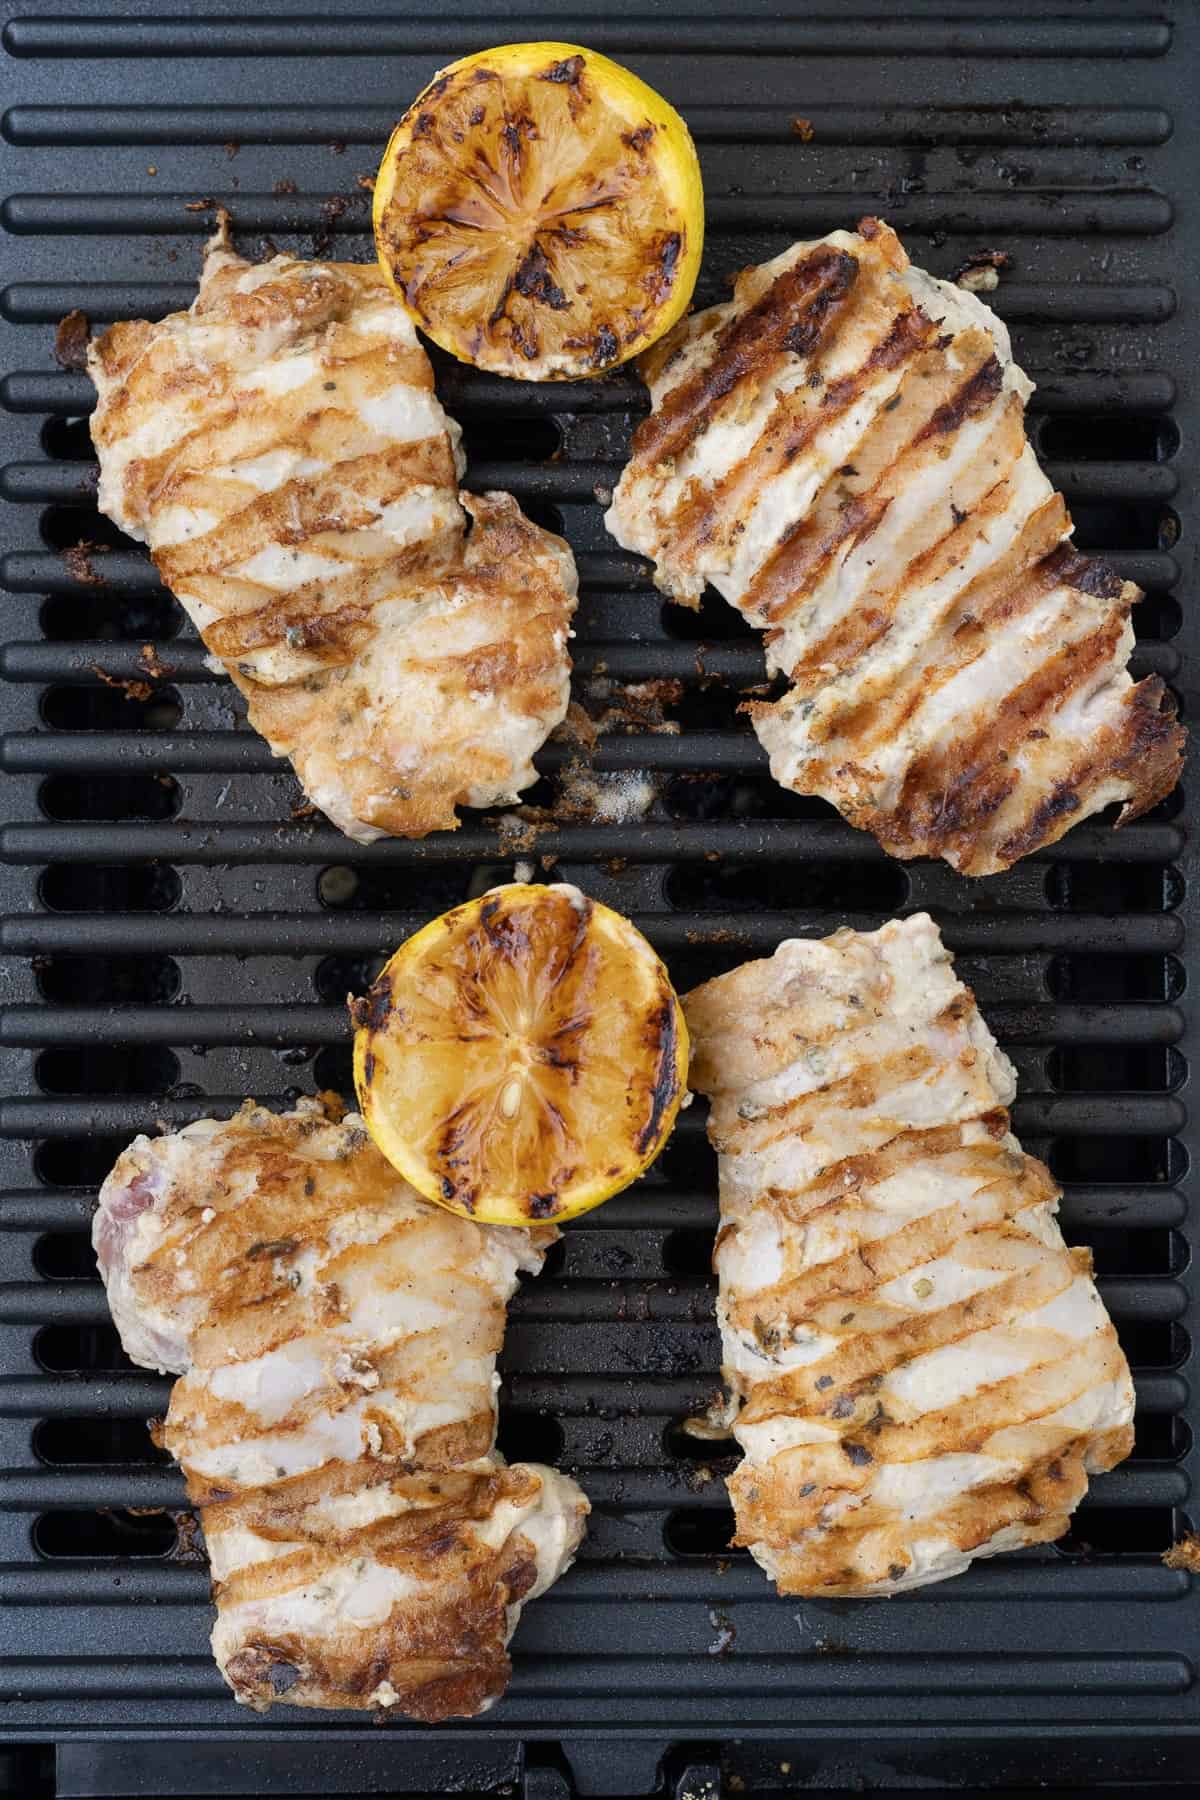 Grilled Chicken on the grill.